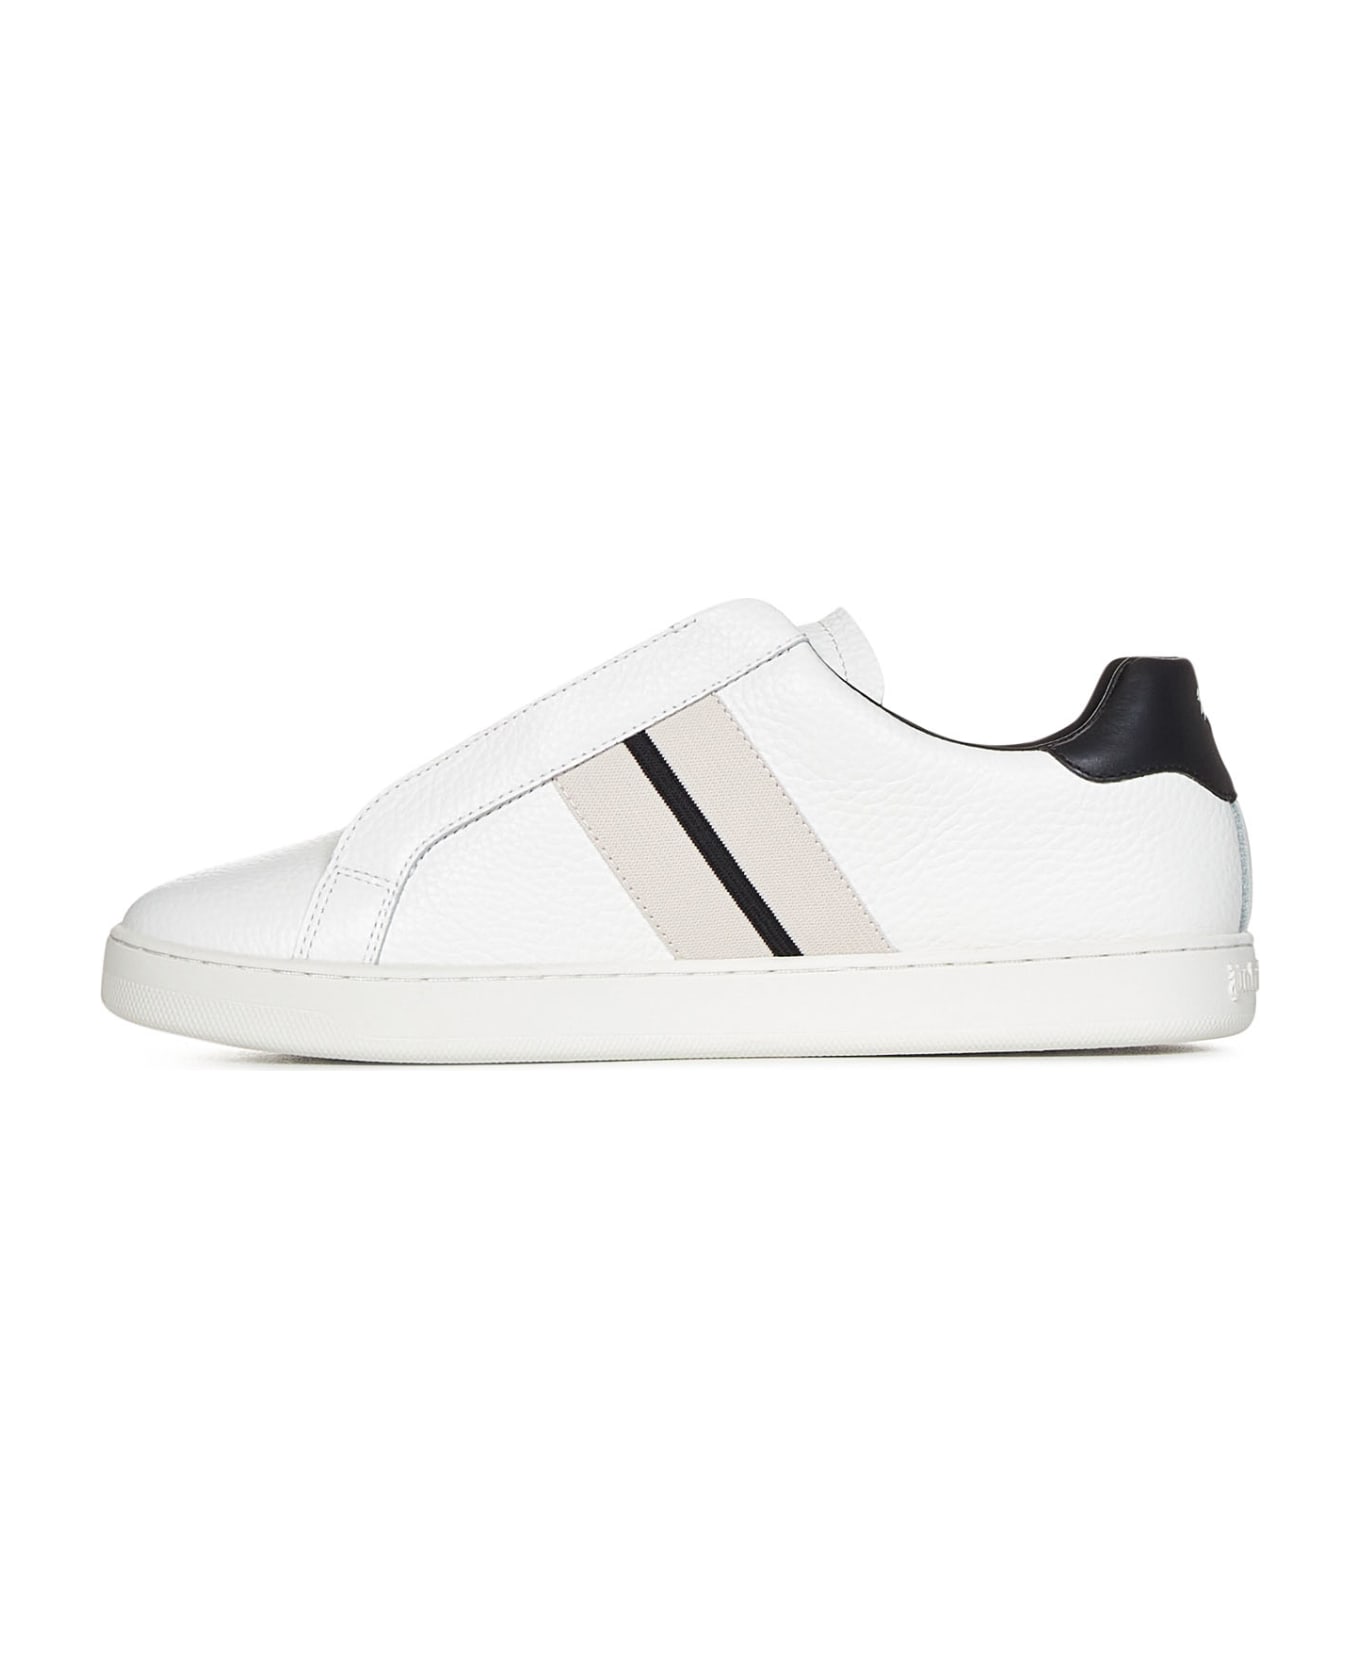 Palm Angels Track Palm Sneakers - Black